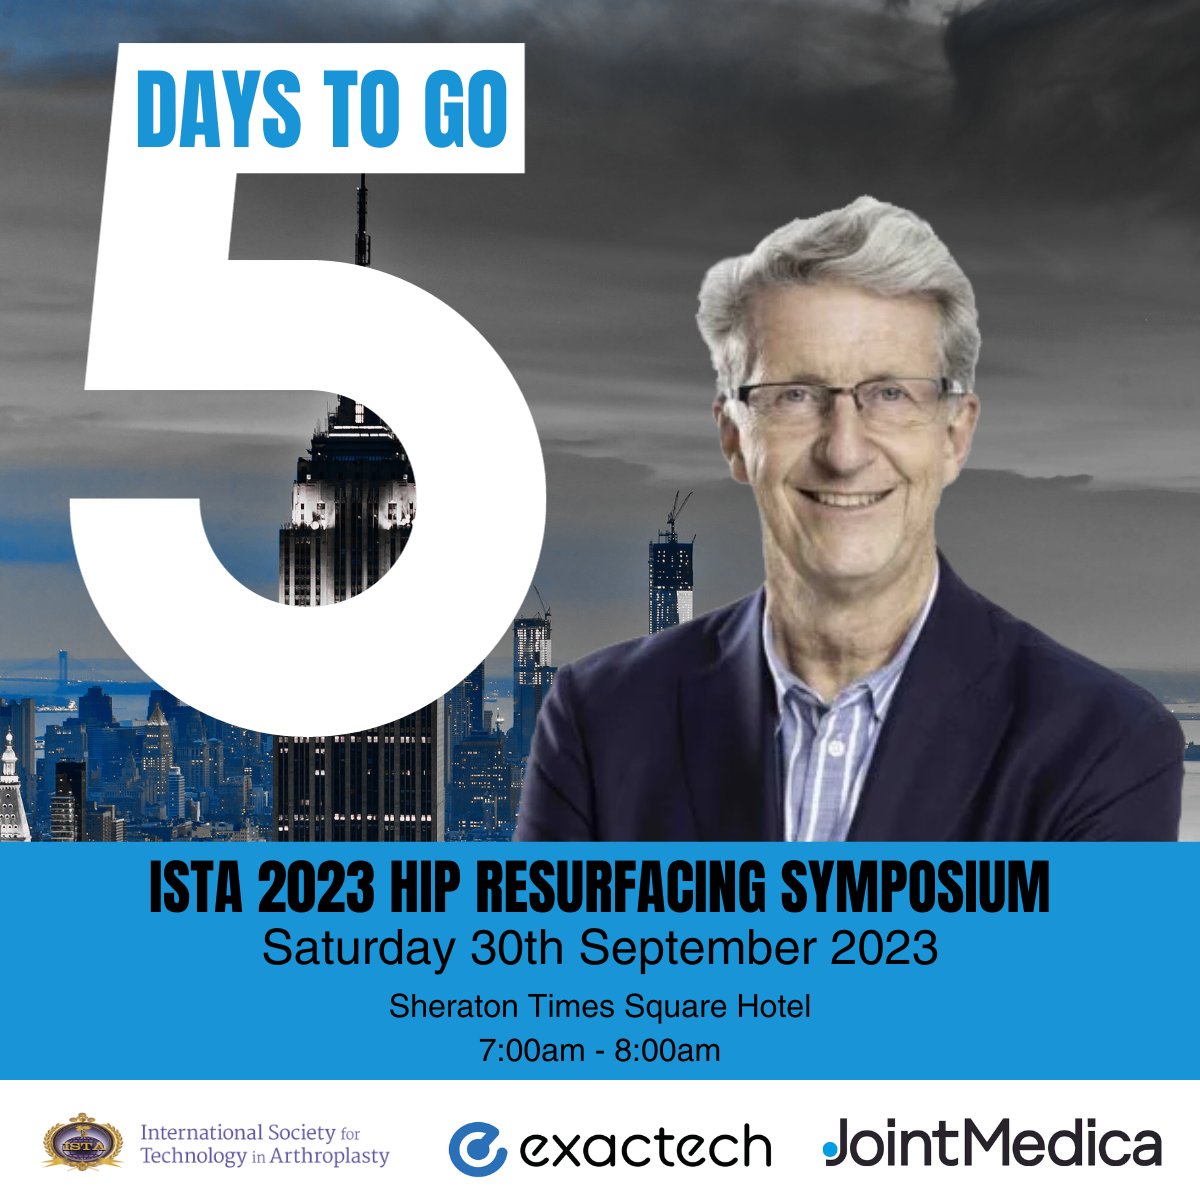 5 days to go!📅⏰️ Join Dr. James MacKenzie and other renowned hip resurfacing specialists at this years ISTA 2023 Hip Resurfacing Symposium.

Find out more here➡️: lnkd.in/eU63ePjM

#ISTA2023 #Hipresurfacing #hipspecialist #hiparthoplasty #medtech #medicaldevices #hra